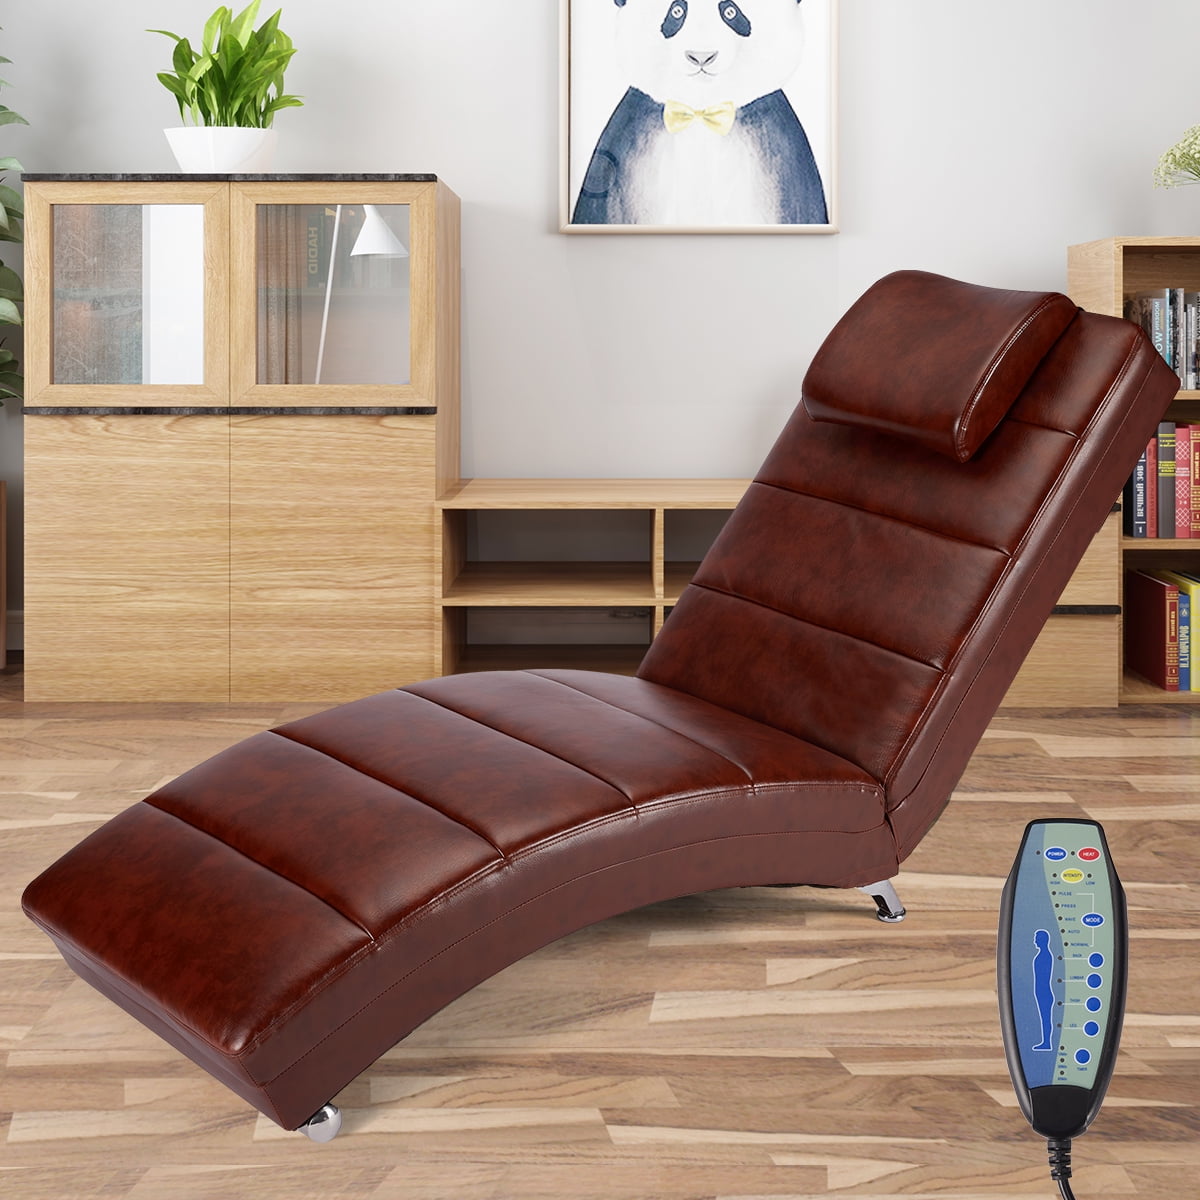 Erommy Electric Massage Recliner Chair Chaise Longue Heated PU Leather